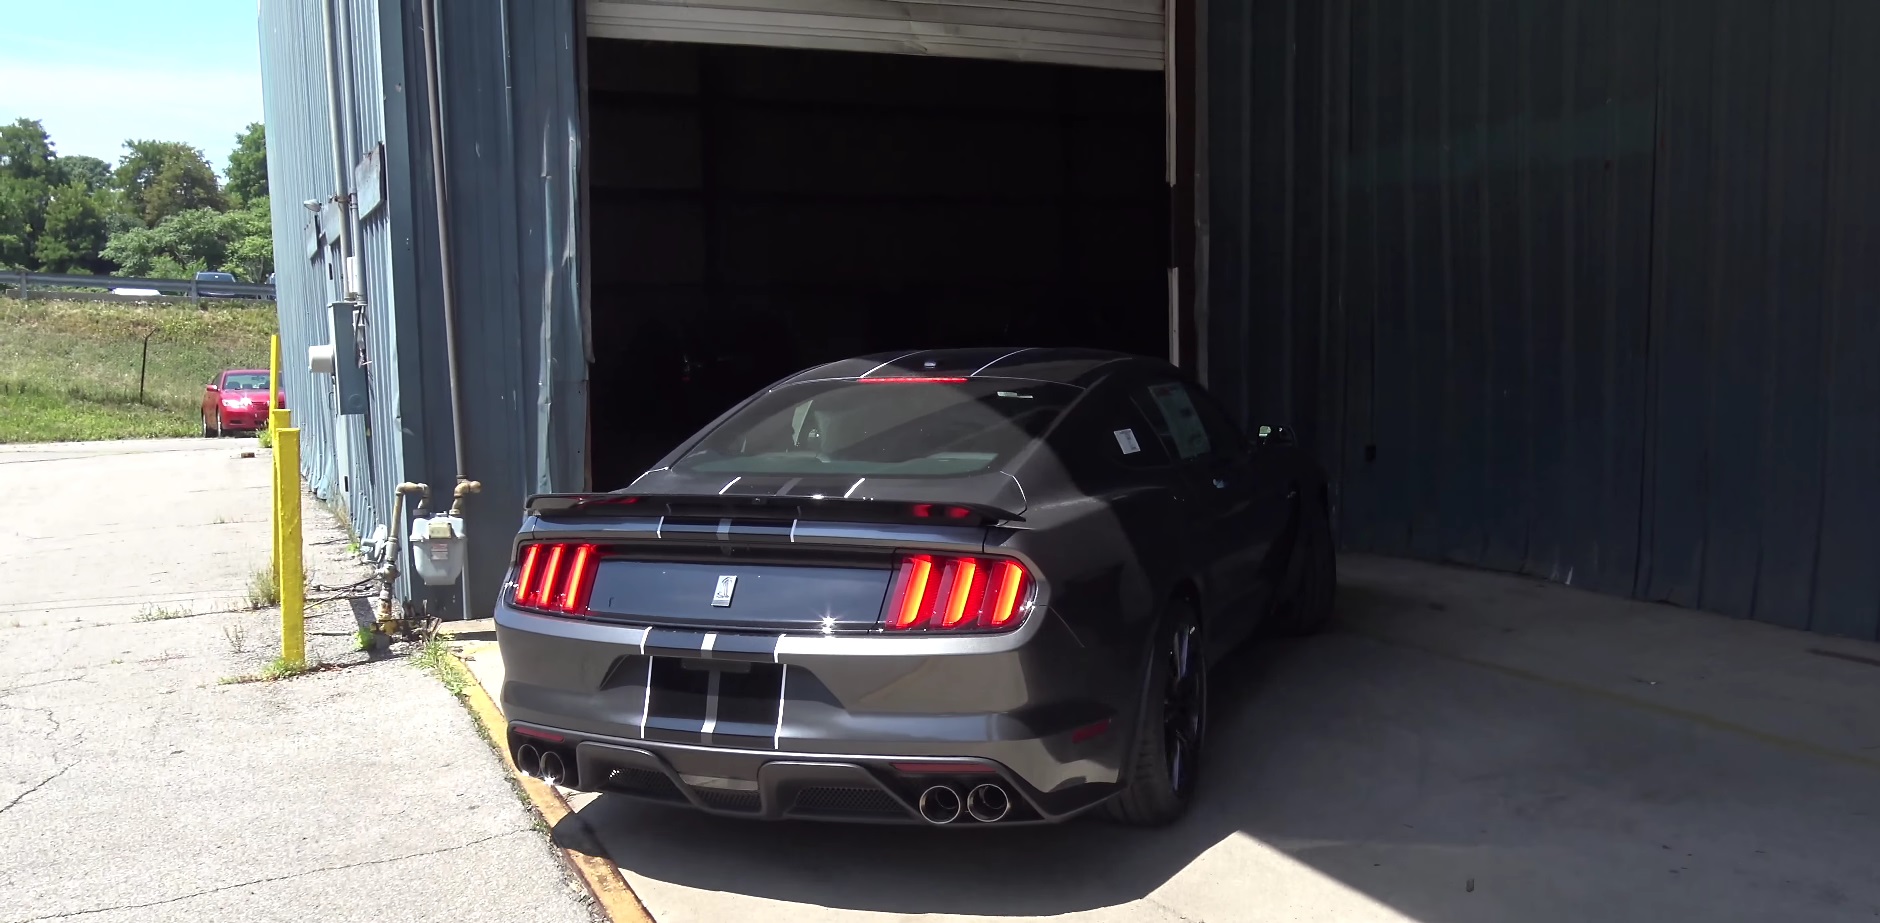 Video: 2017 Ford Mustang Shelby GT350 - Normal VS Sport Exhaust Mode Comparison